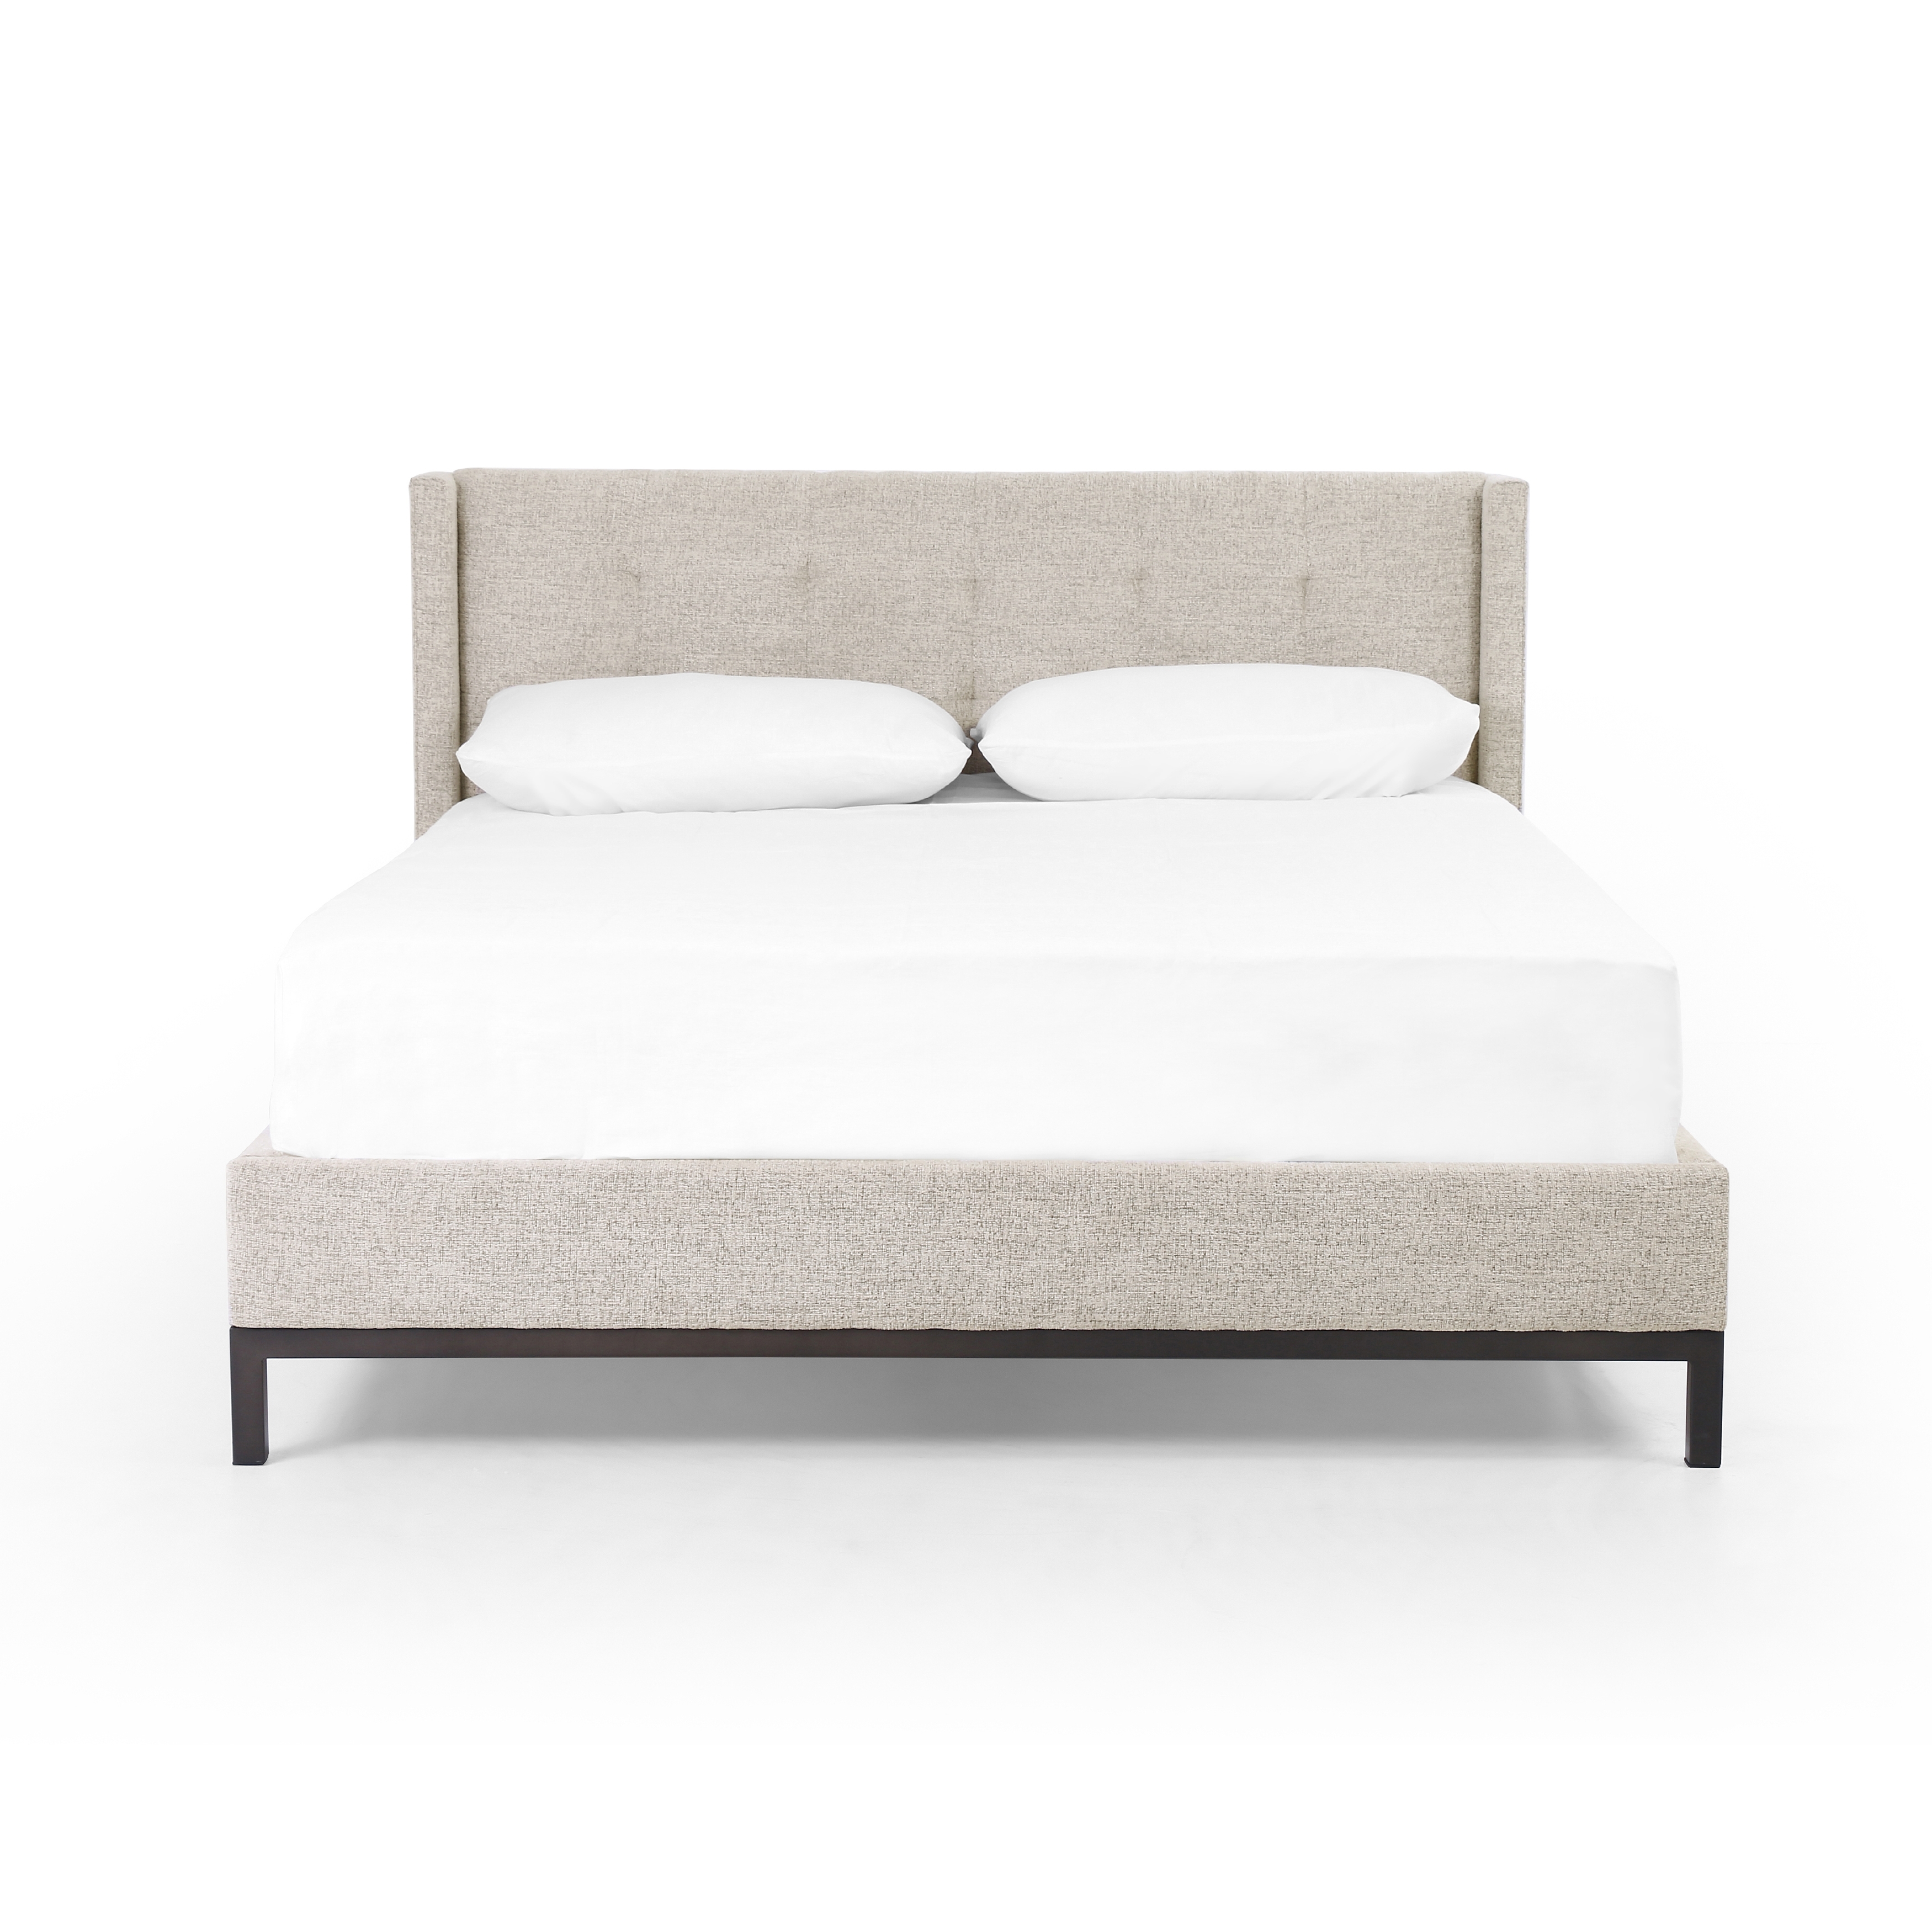 Newhall Bed-Plushtone Linen-Queen - Image 2